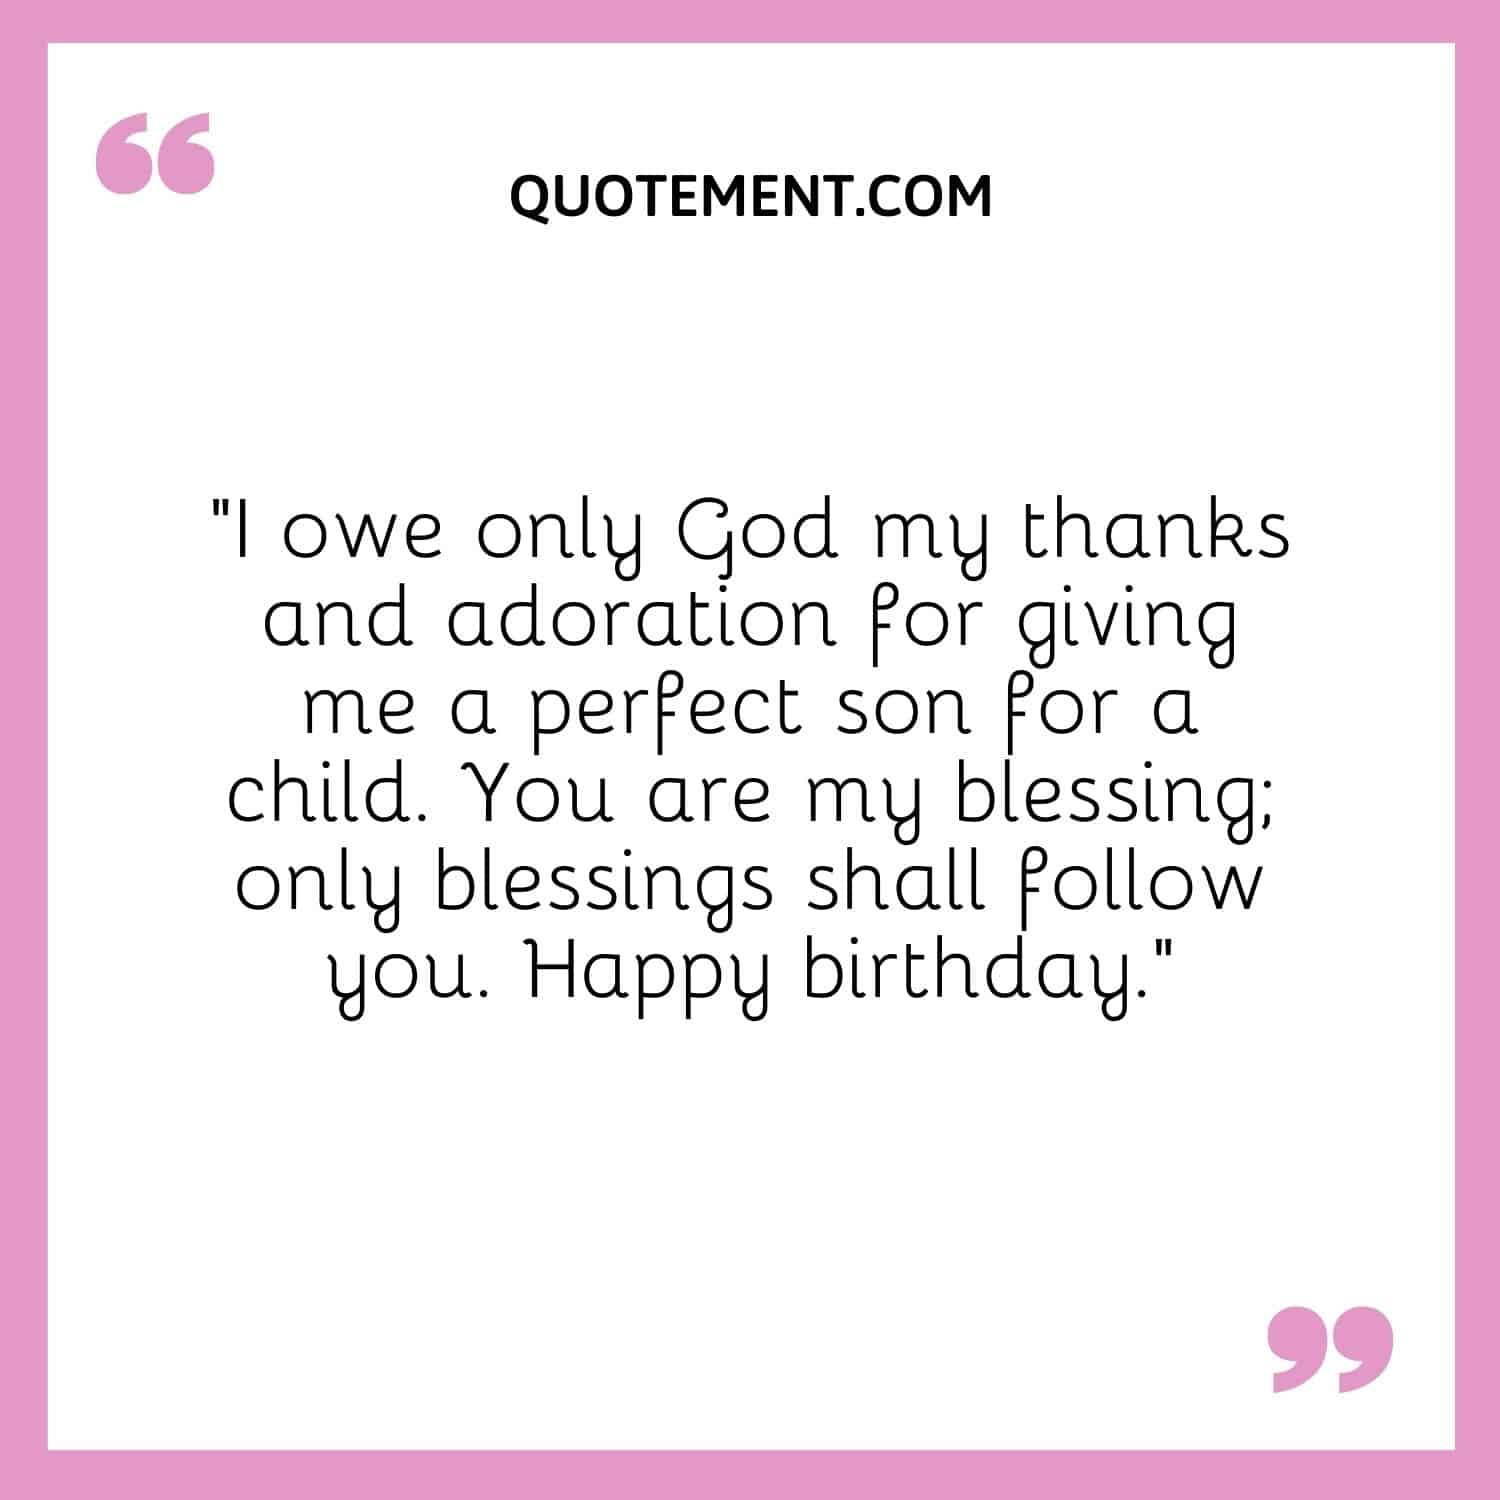 I owe only God my thanks and adoration for giving me a perfect son for a child.